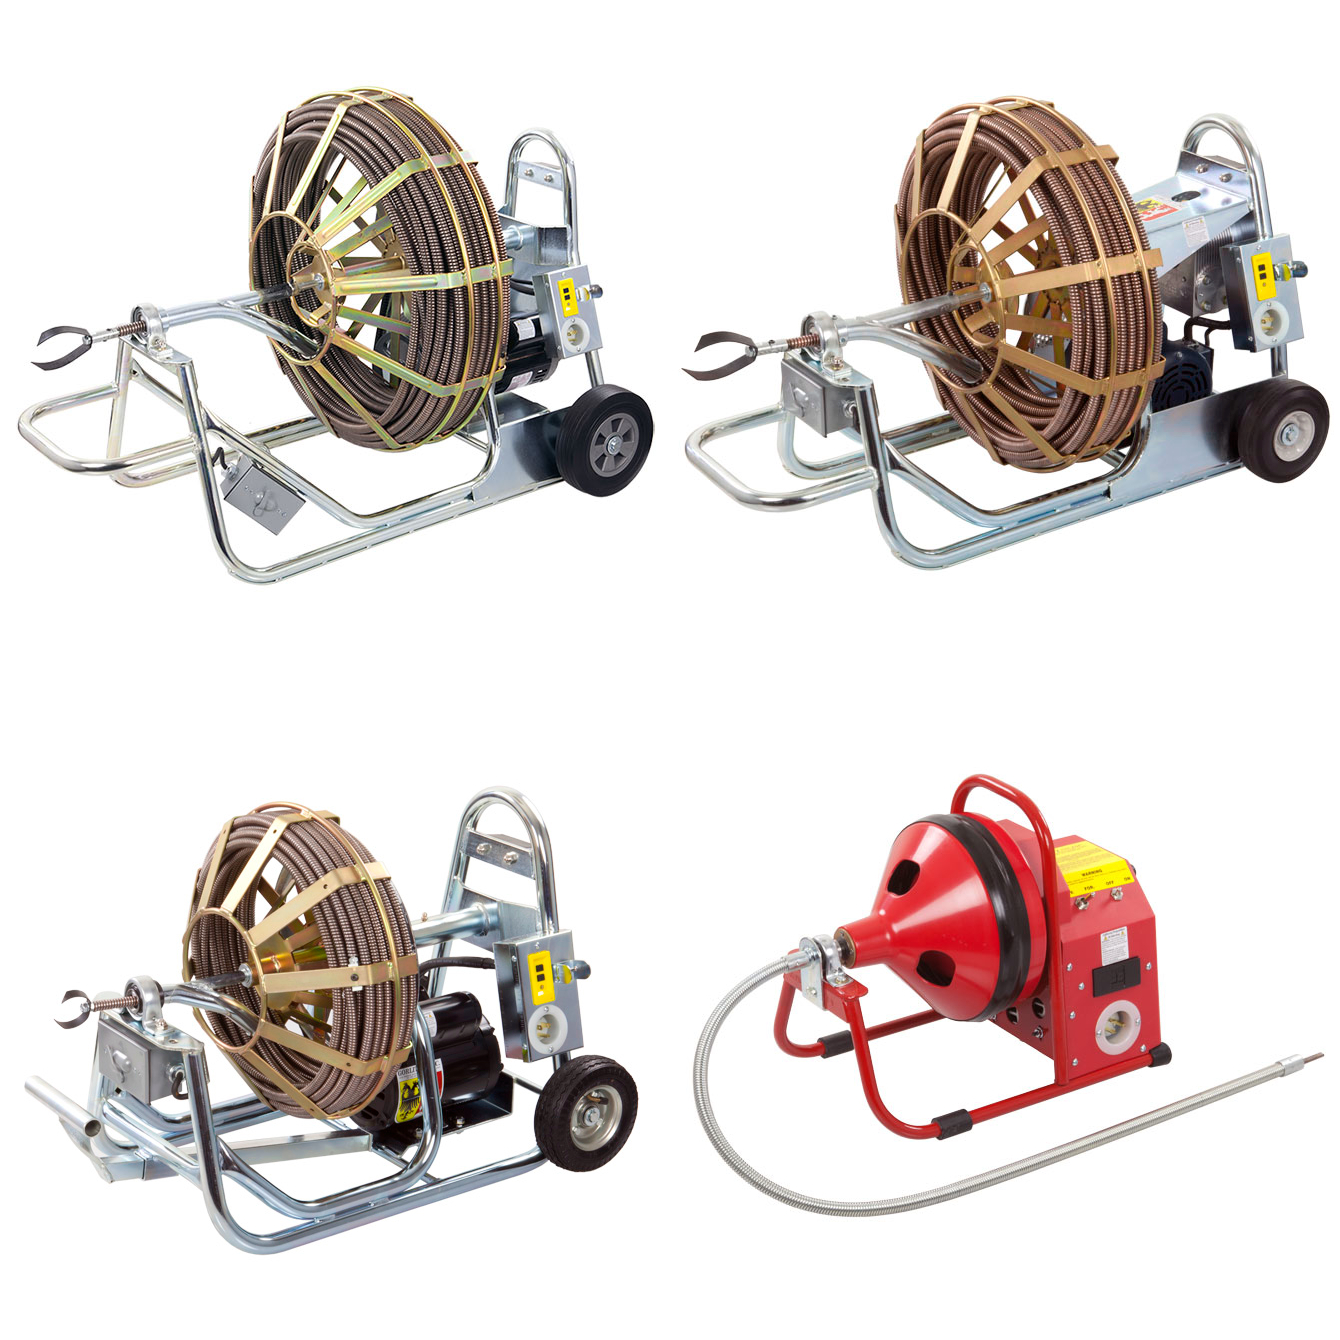 Commercial 100 Foot Sewer Snake Drain Cleaning Machine - Buy Commercial 100  Foot Sewer Snake Drain Cleaning Machine Product on